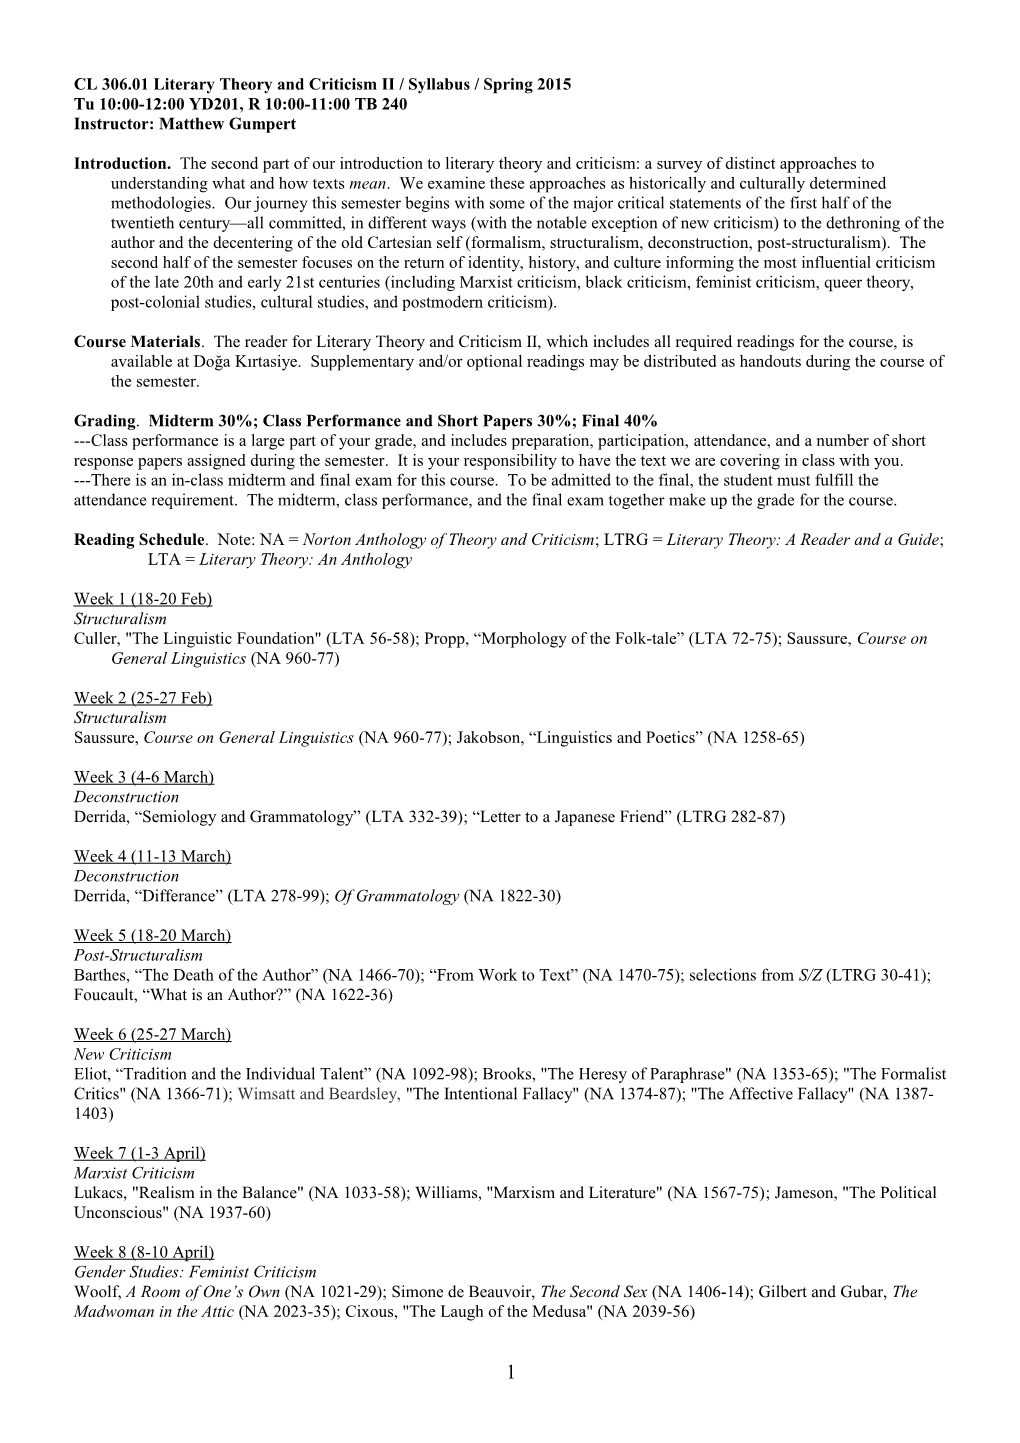 CL 306.01 Literary Theory and Criticism II/Syllabus/Spring 2015